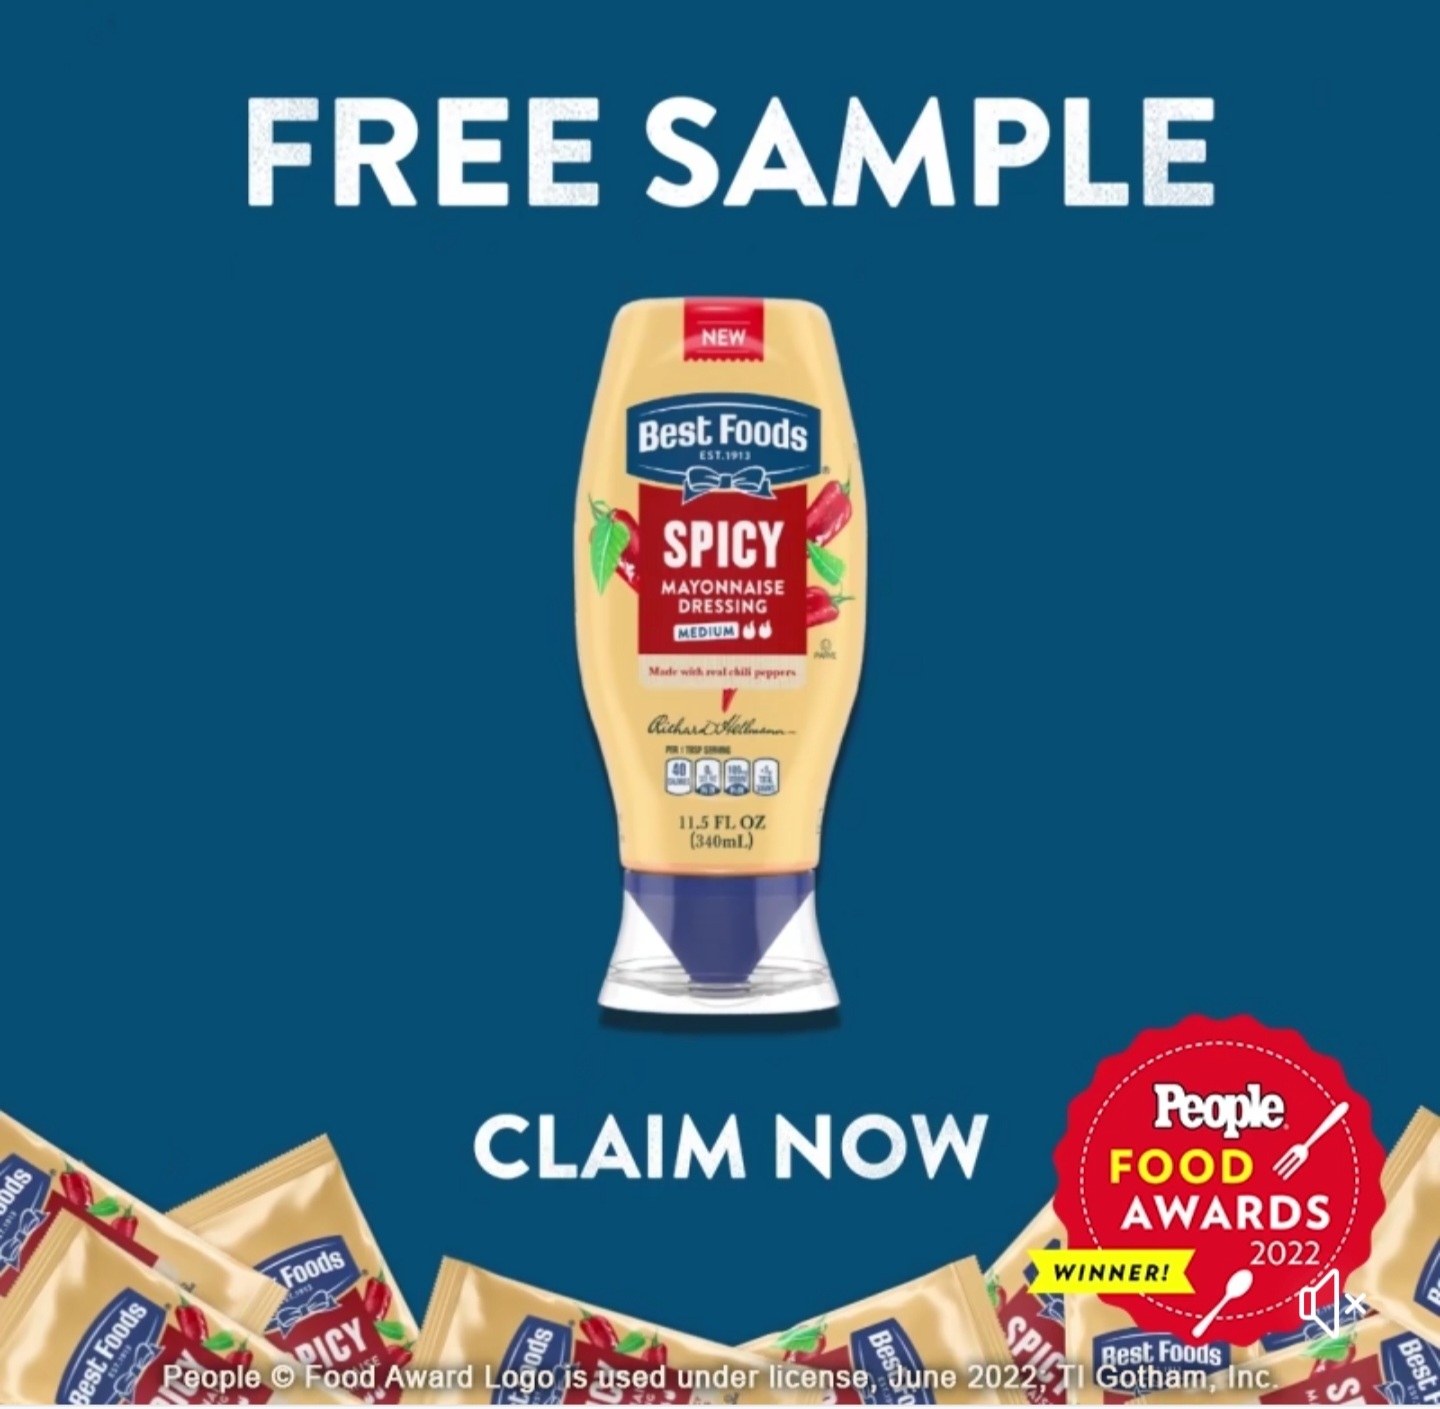 Free Sample of Beat Foods Spicy Mayonnaise